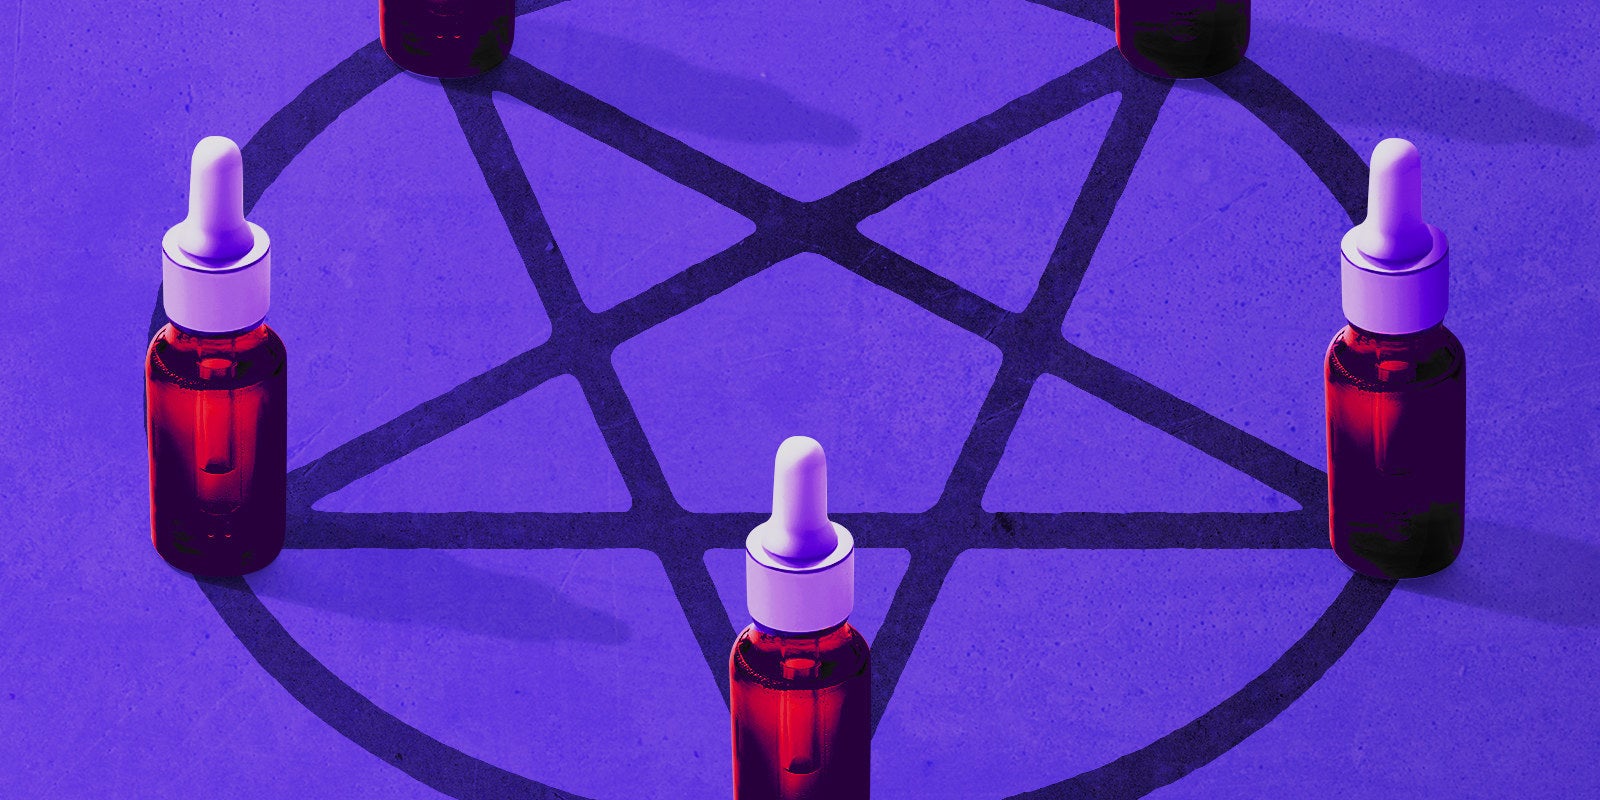 These Women Say An Essential Oil MLM Has Been Taken Over By
Satan. Yes, Really.